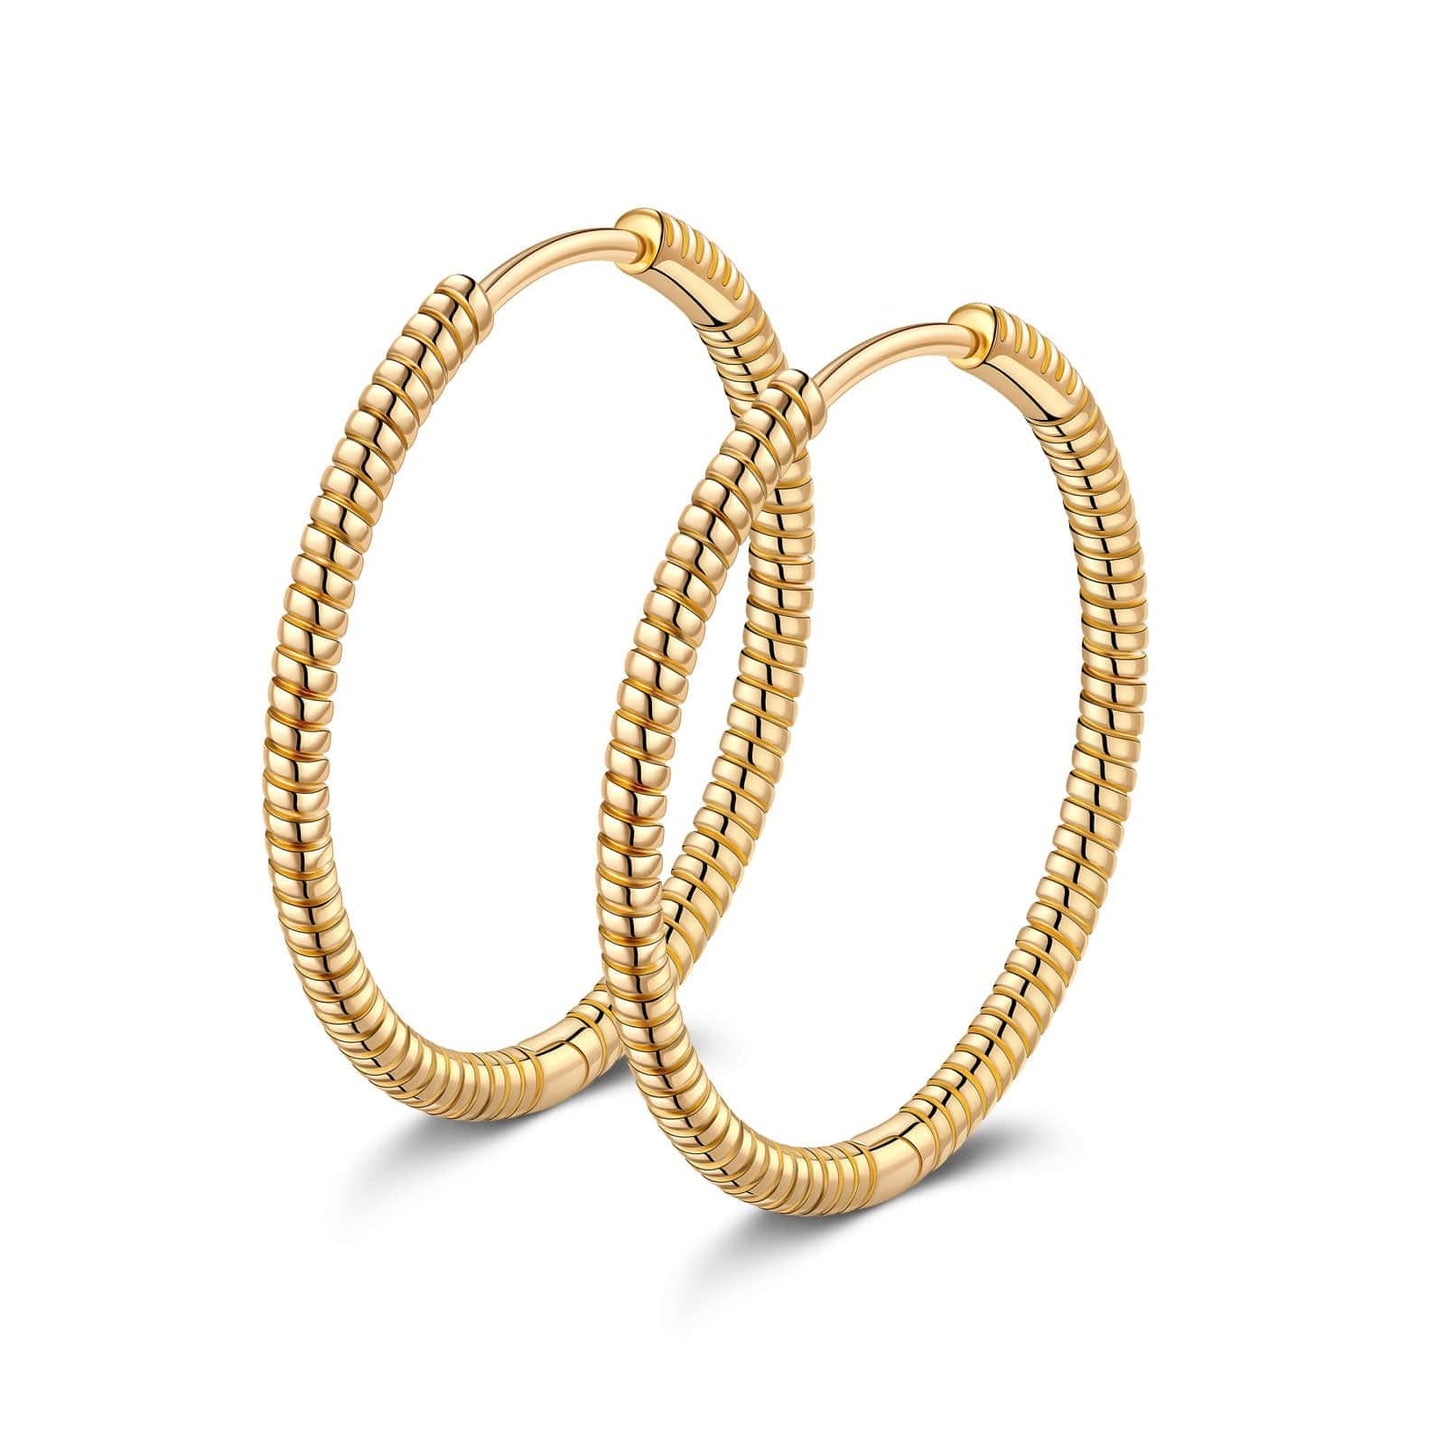 Tarnish-resistant Silver Classic Hoop Earrings with Sterling Silver Ear Post In 14K Gold Plated